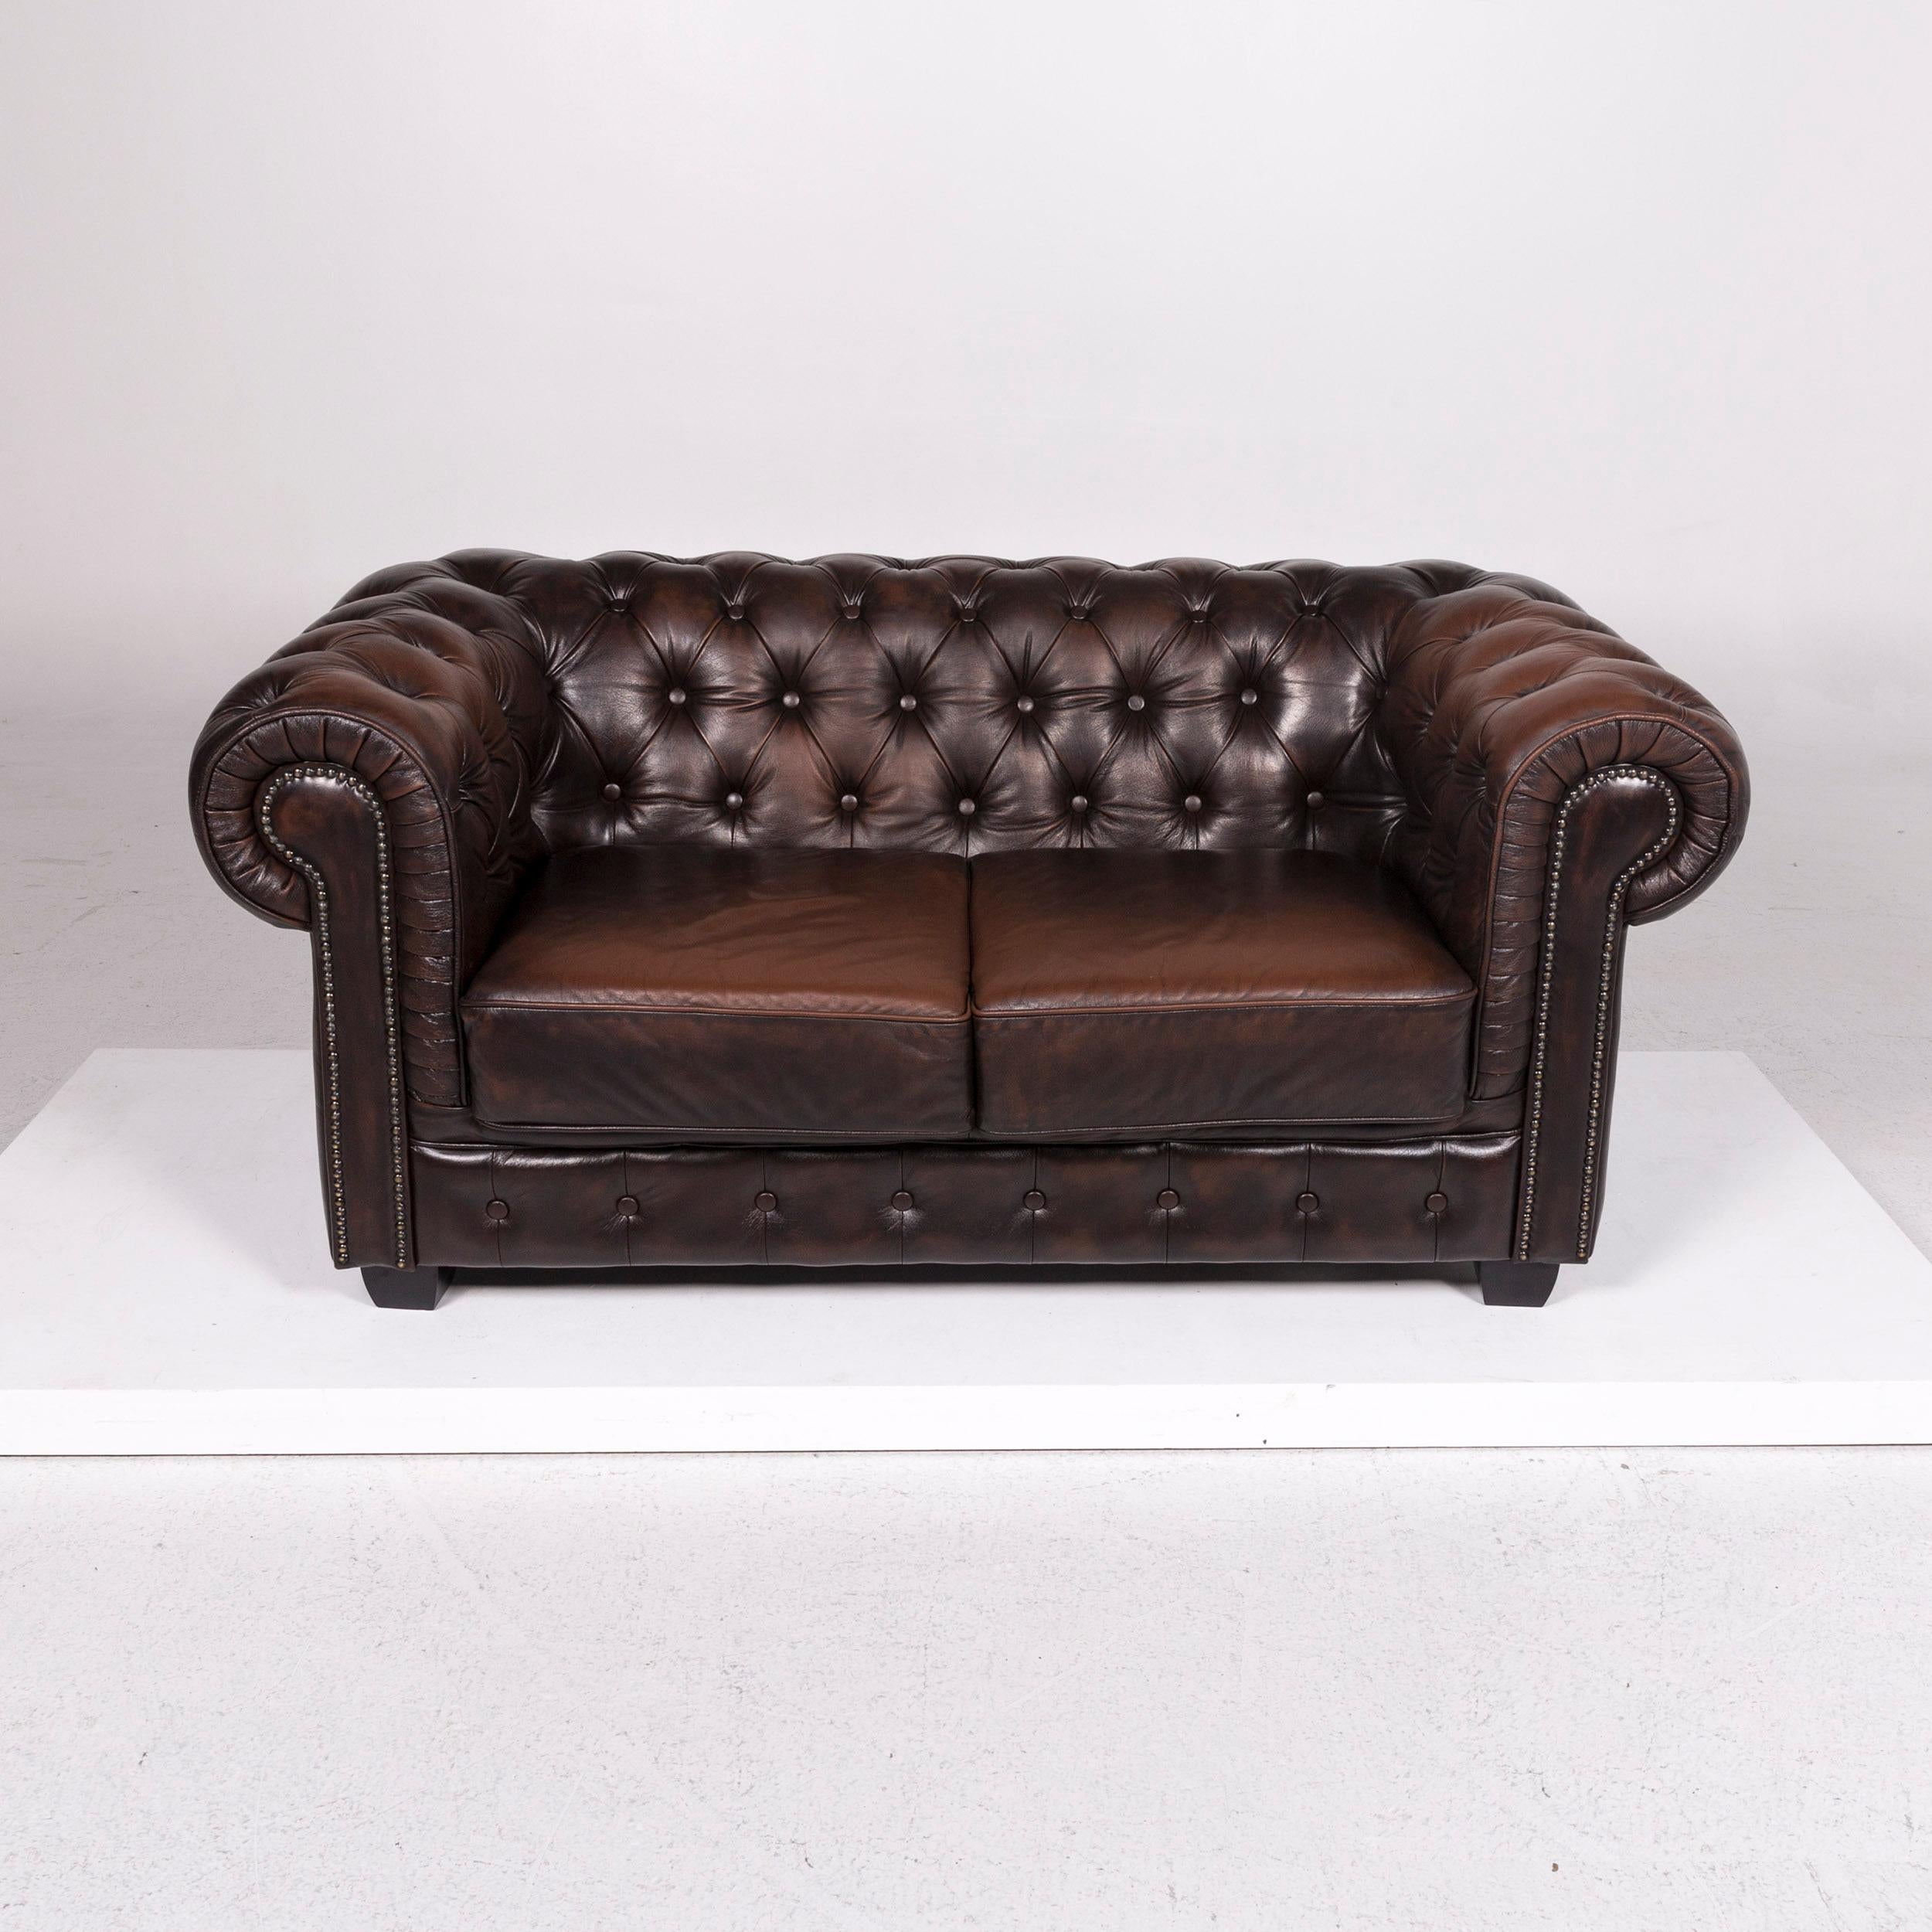 Chesterfield Leather Sofa Brown Dark Brown Two-Seat Retro Couch 1